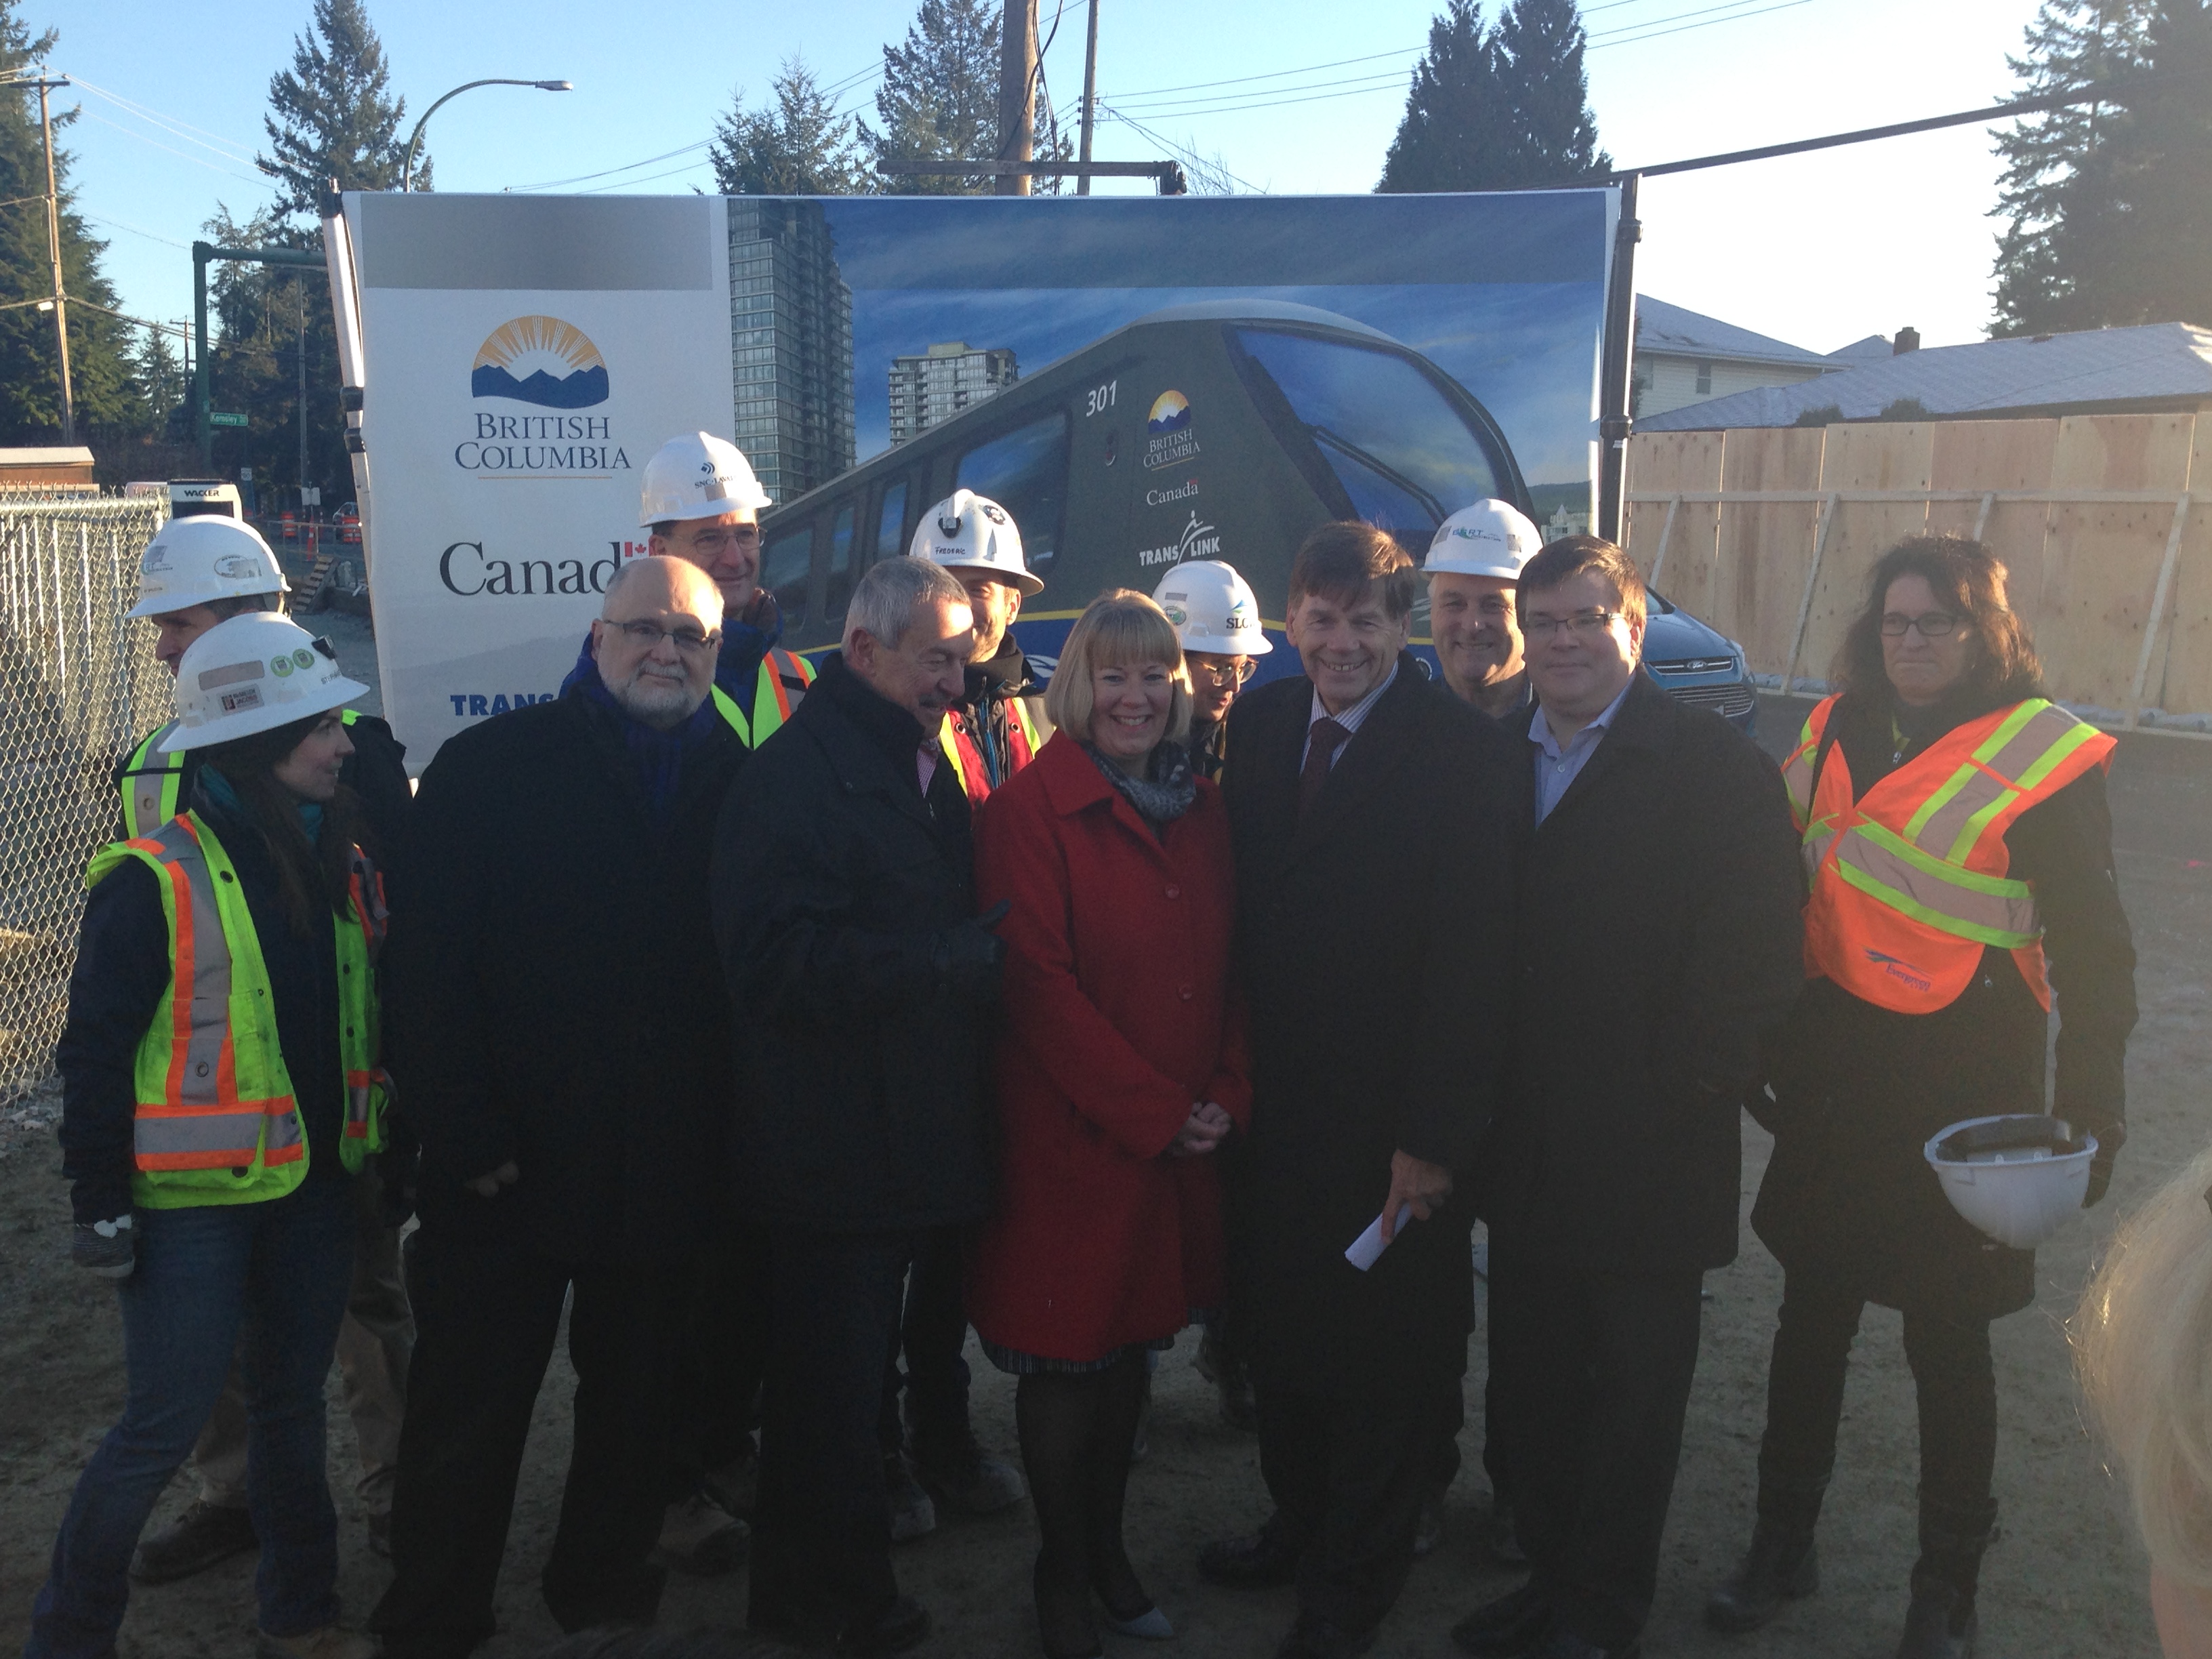 Left to right: Ron McKinnon, MP for Coquitlam-Port Coquitlam, Minister Peter Fassbender, MLA Linda Reimer, Port Moody-Coquitlam, Barry Forbes, Board Chair, TransLink, Mayor of Port Moody Mike Clay